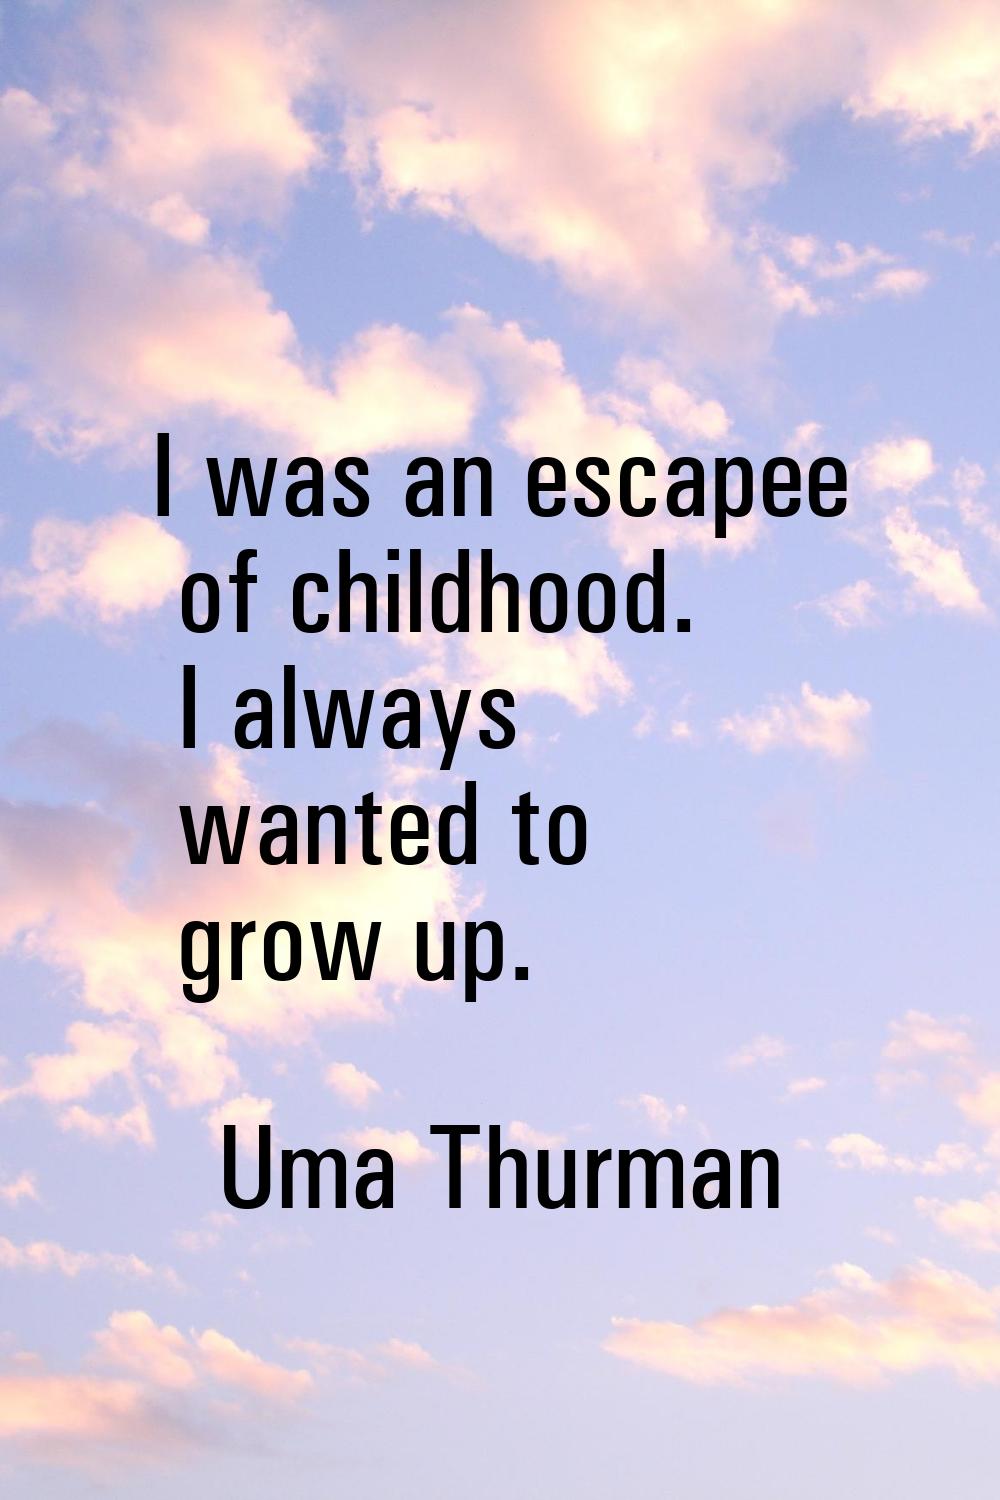 I was an escapee of childhood. I always wanted to grow up.